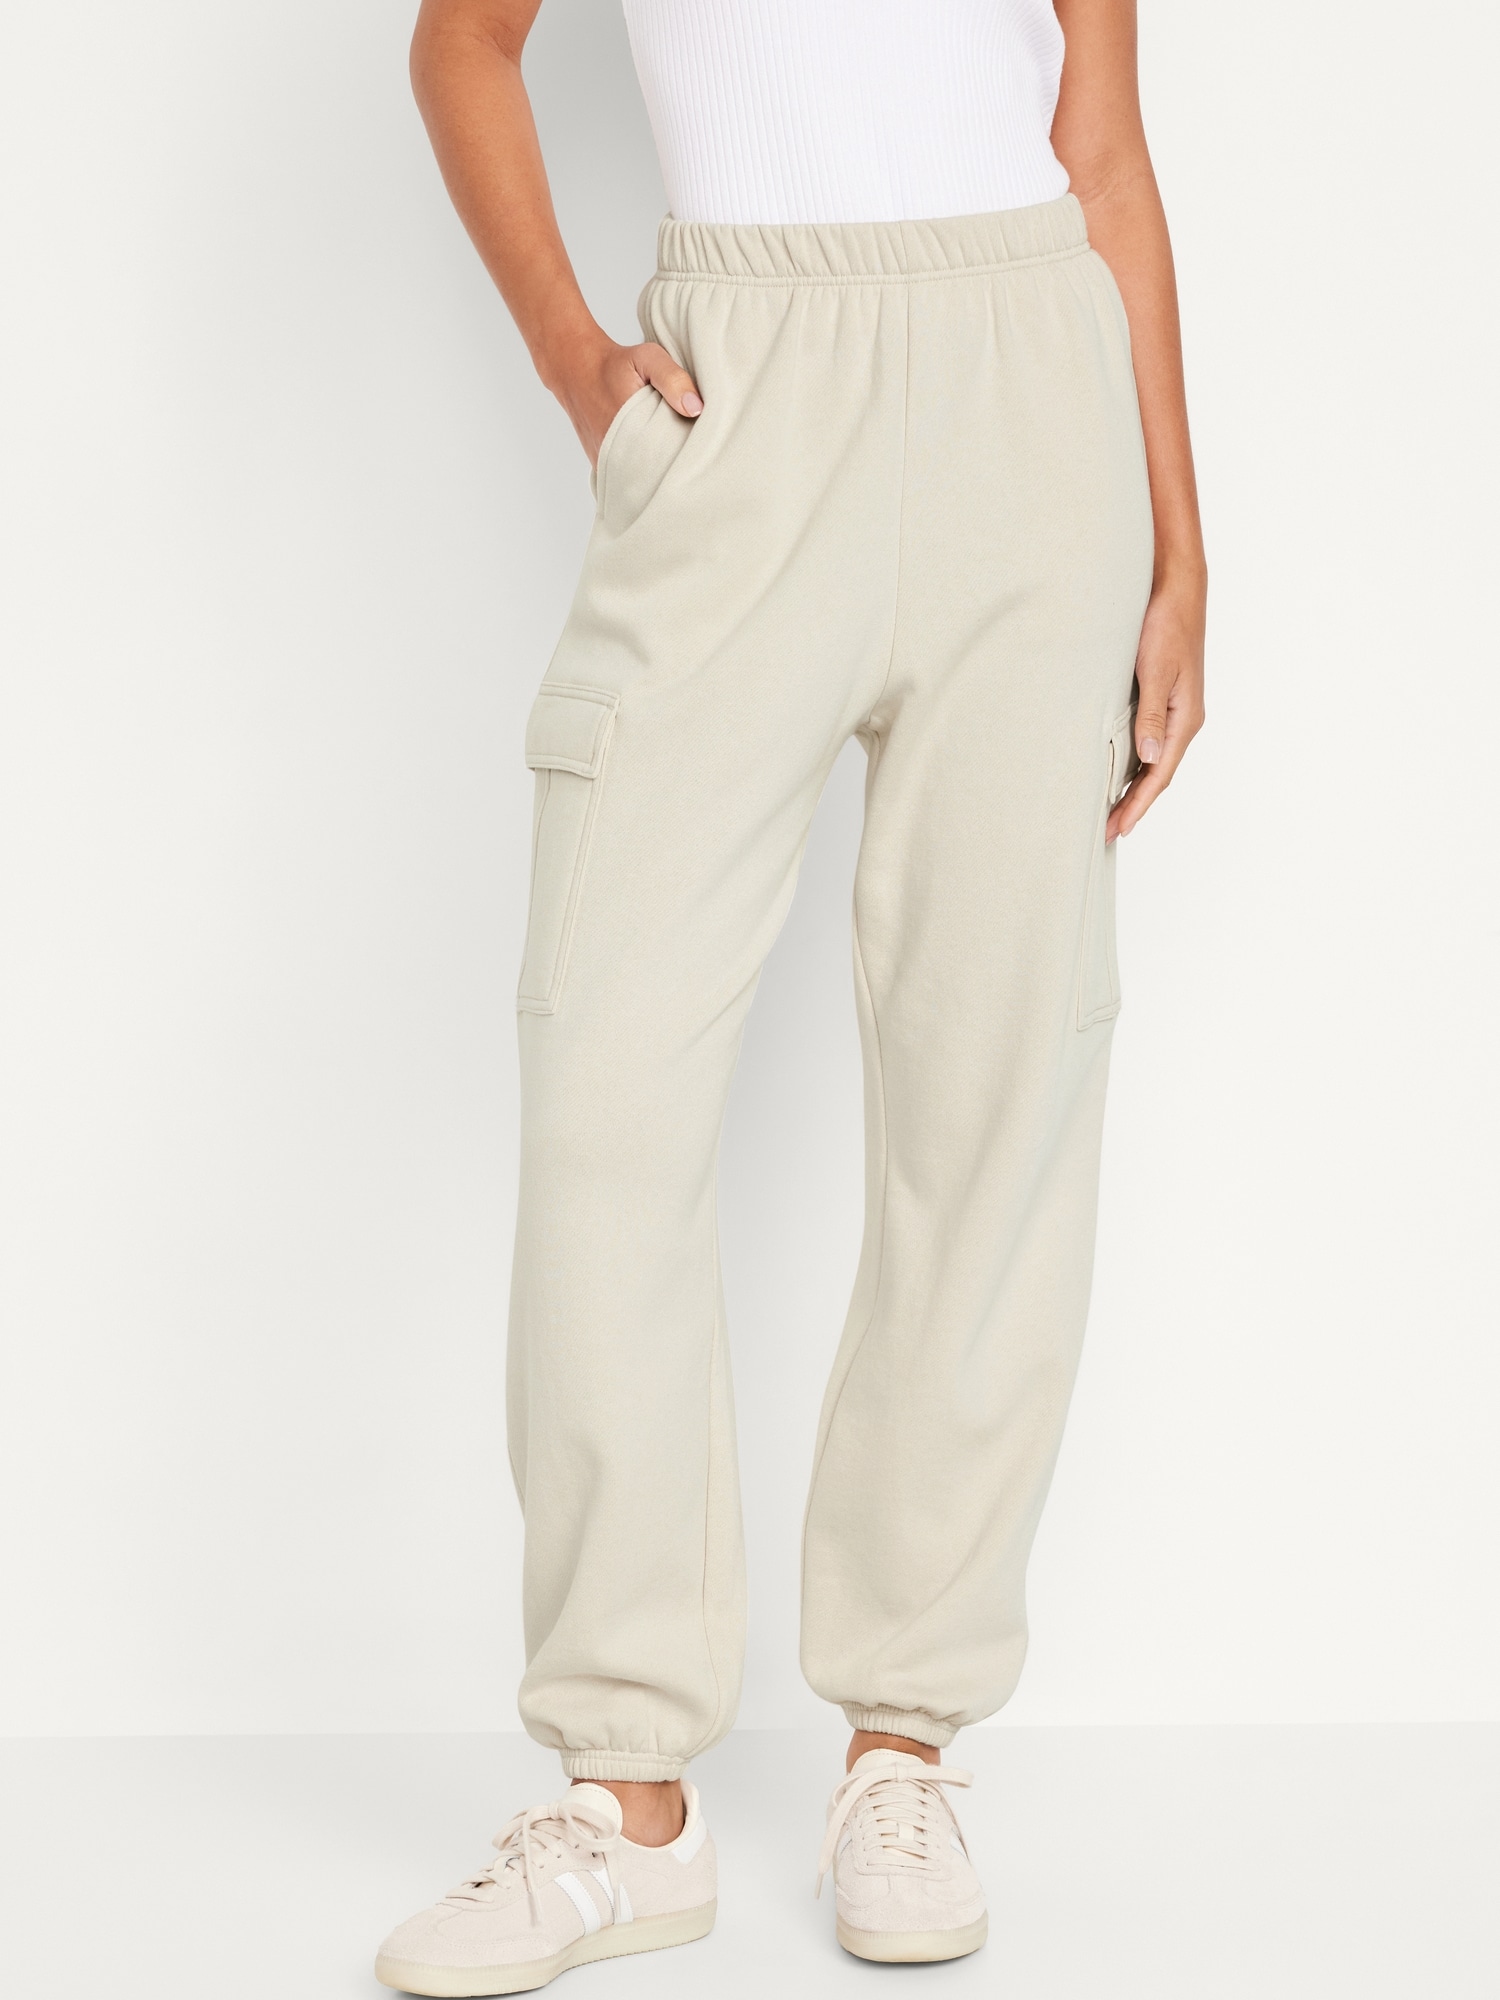 High-Waisted Cargo Sweatpants | Old Navy